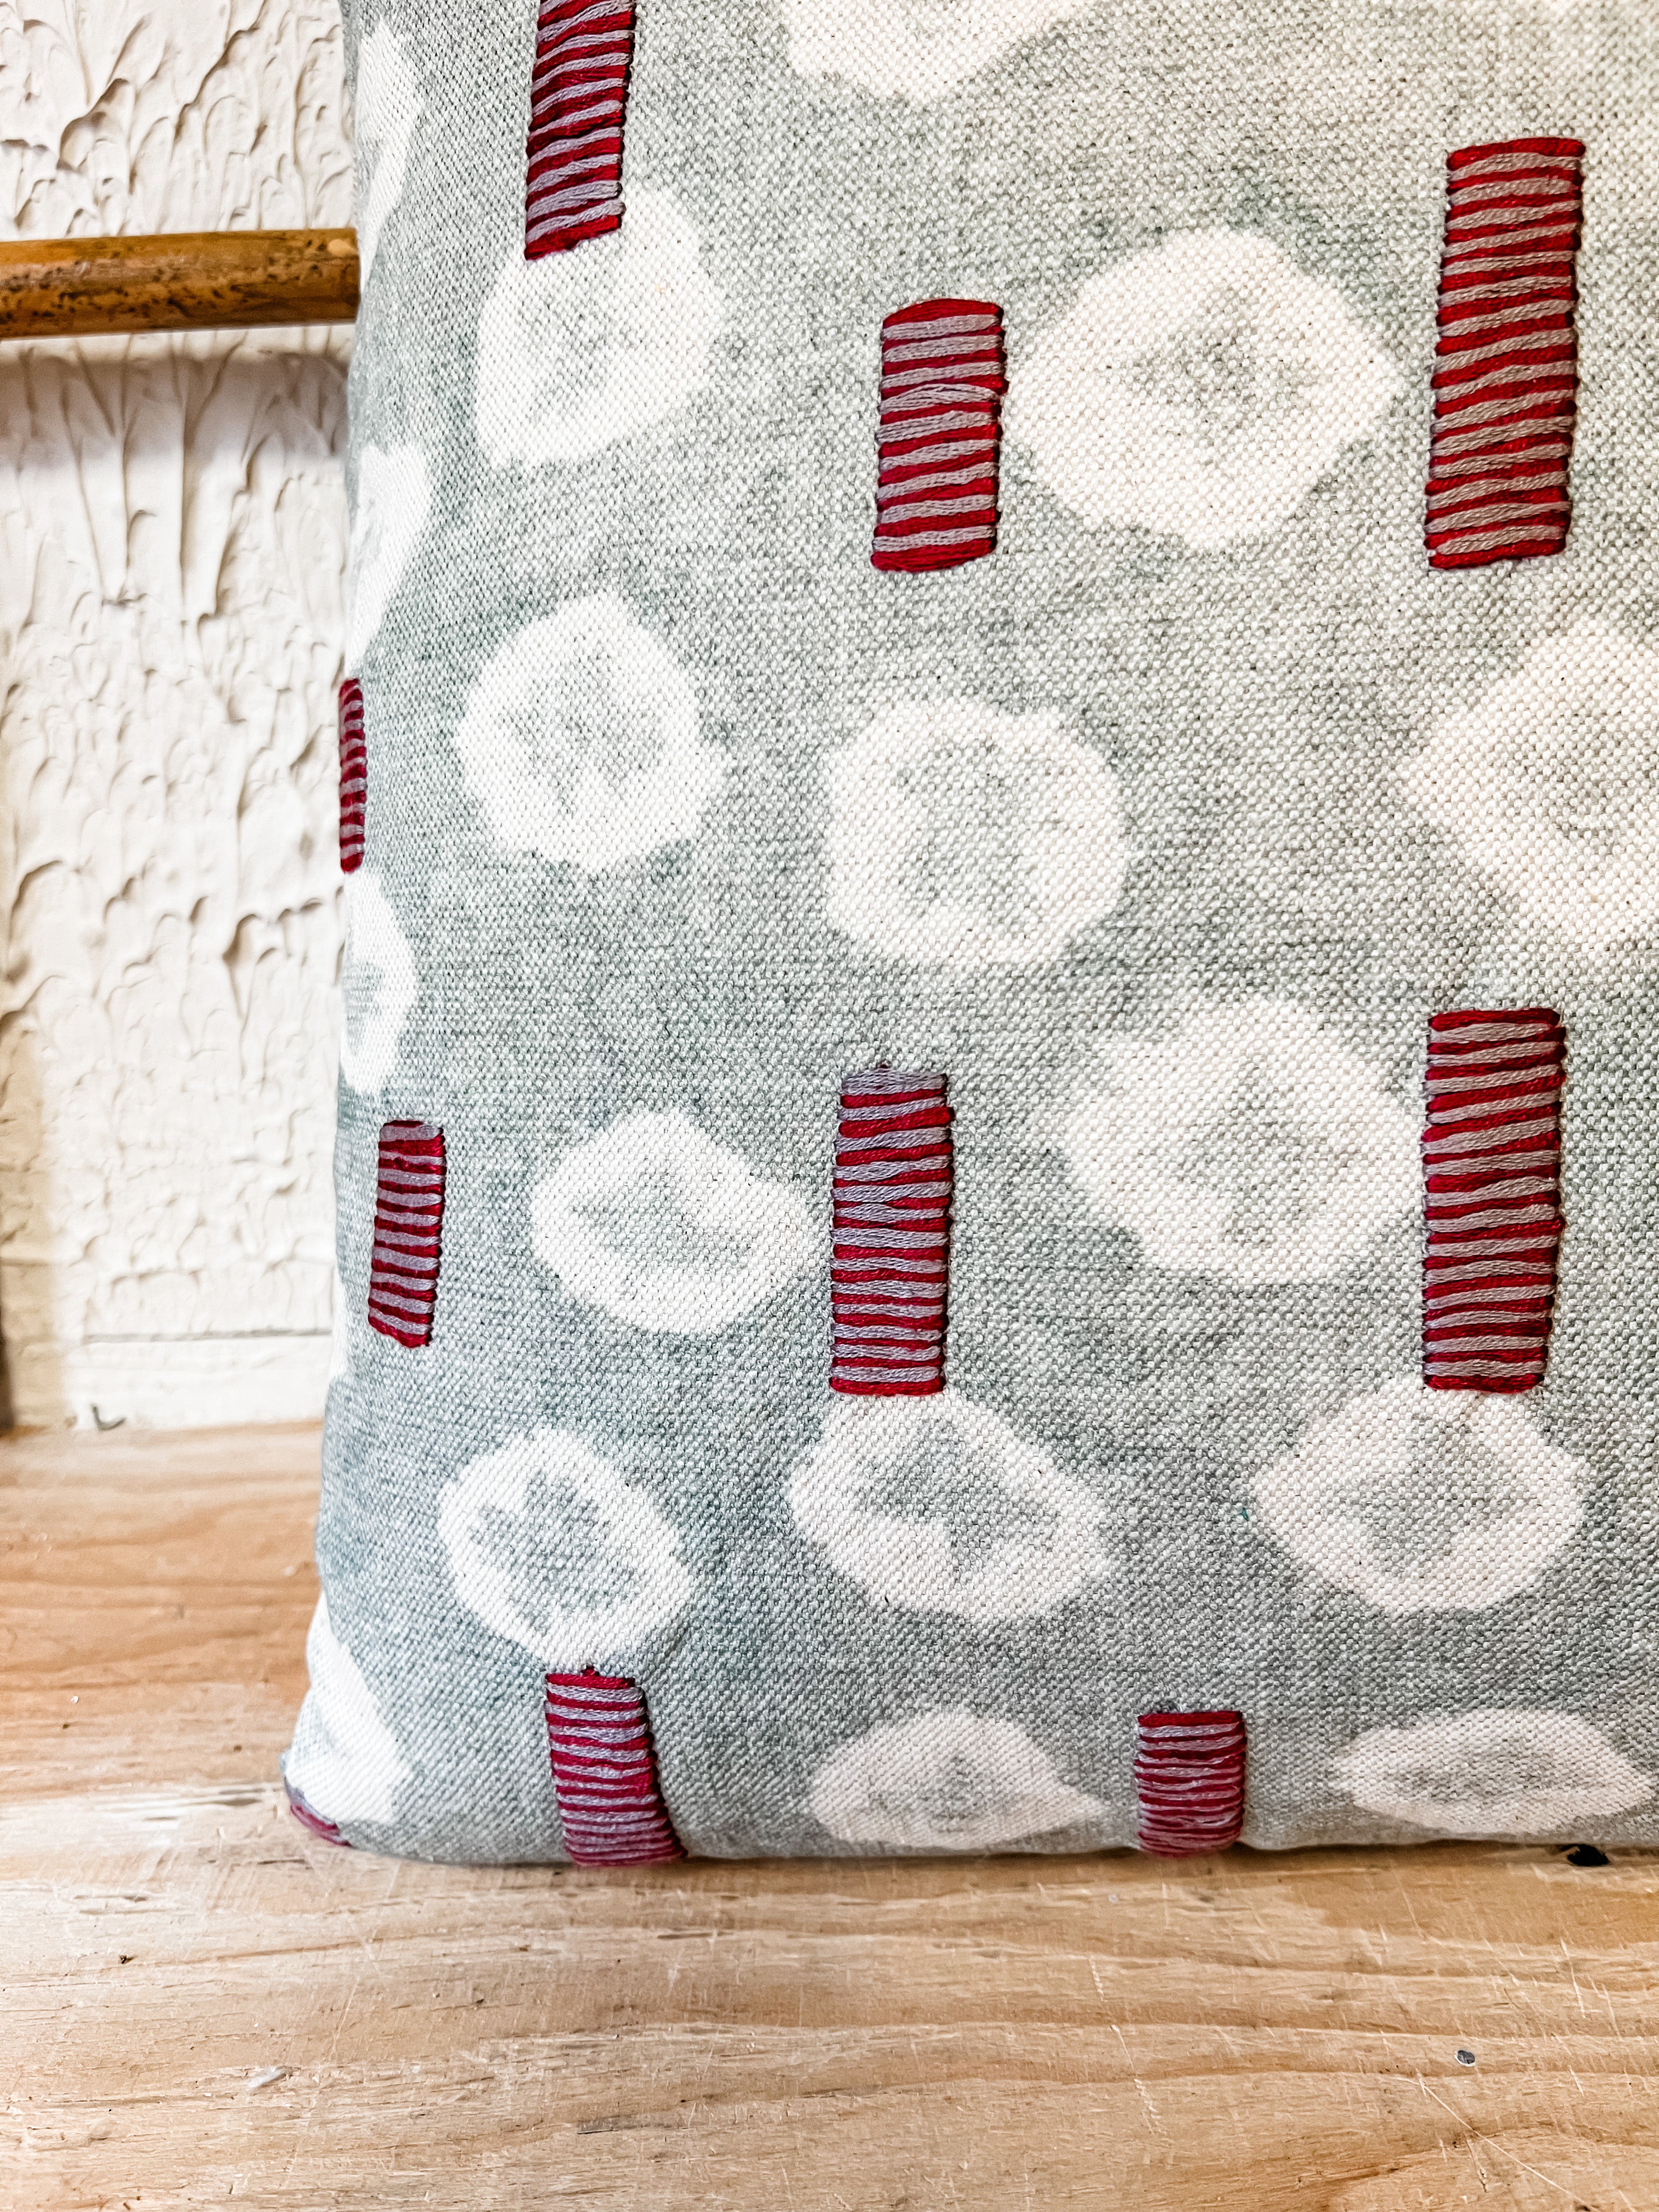 18" Square Linen Printed Pillow